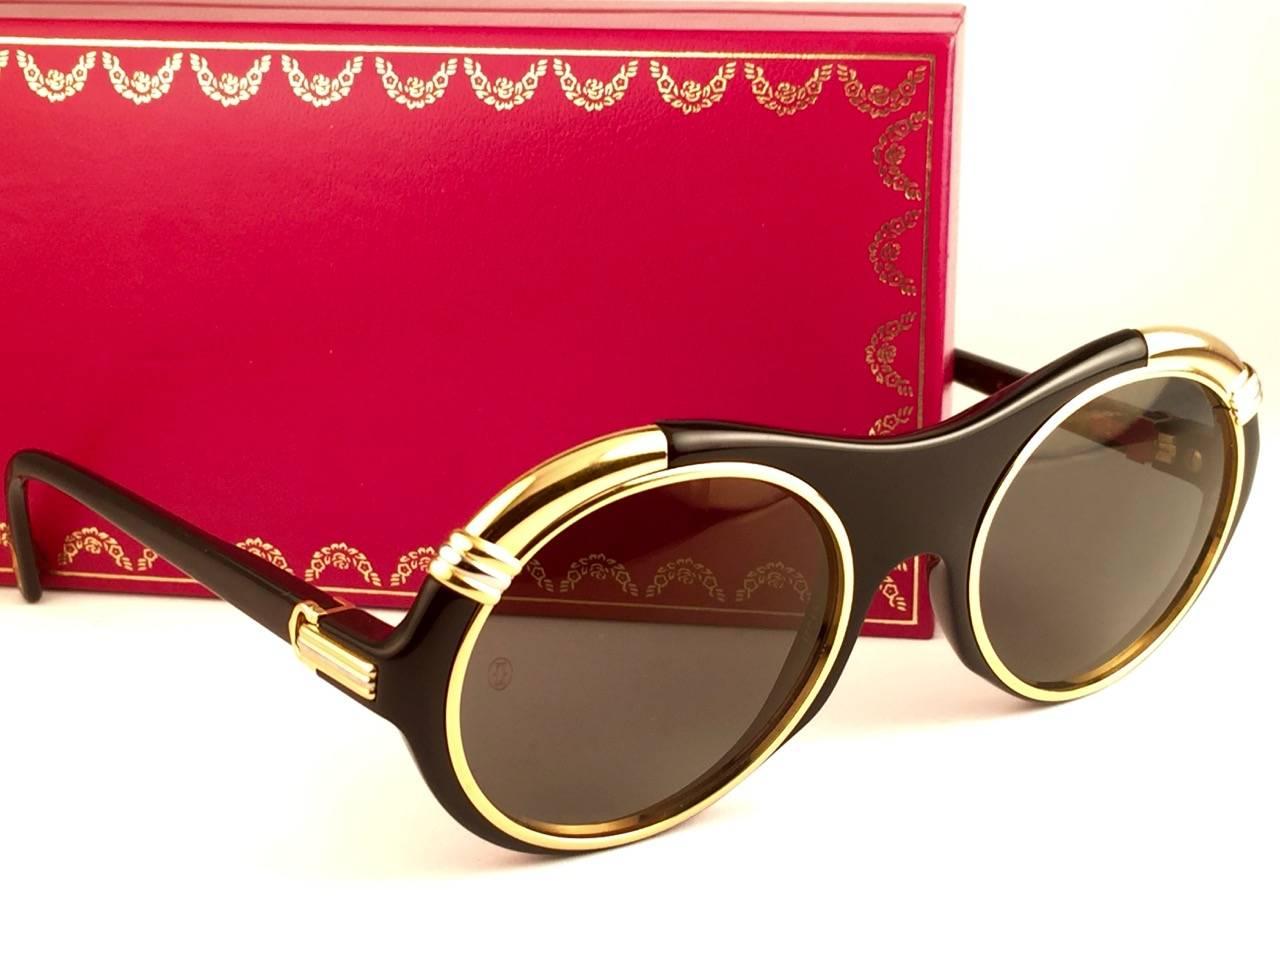 New from 1991 Original Cartier Diabolo Art Deco Sunglasses with spotless amazing brown gold mirrored (uv protection). 
Frame has the famous real gold and white gold accents in the middle and on the sides.
All hallmarks. Cartier gold signs on the